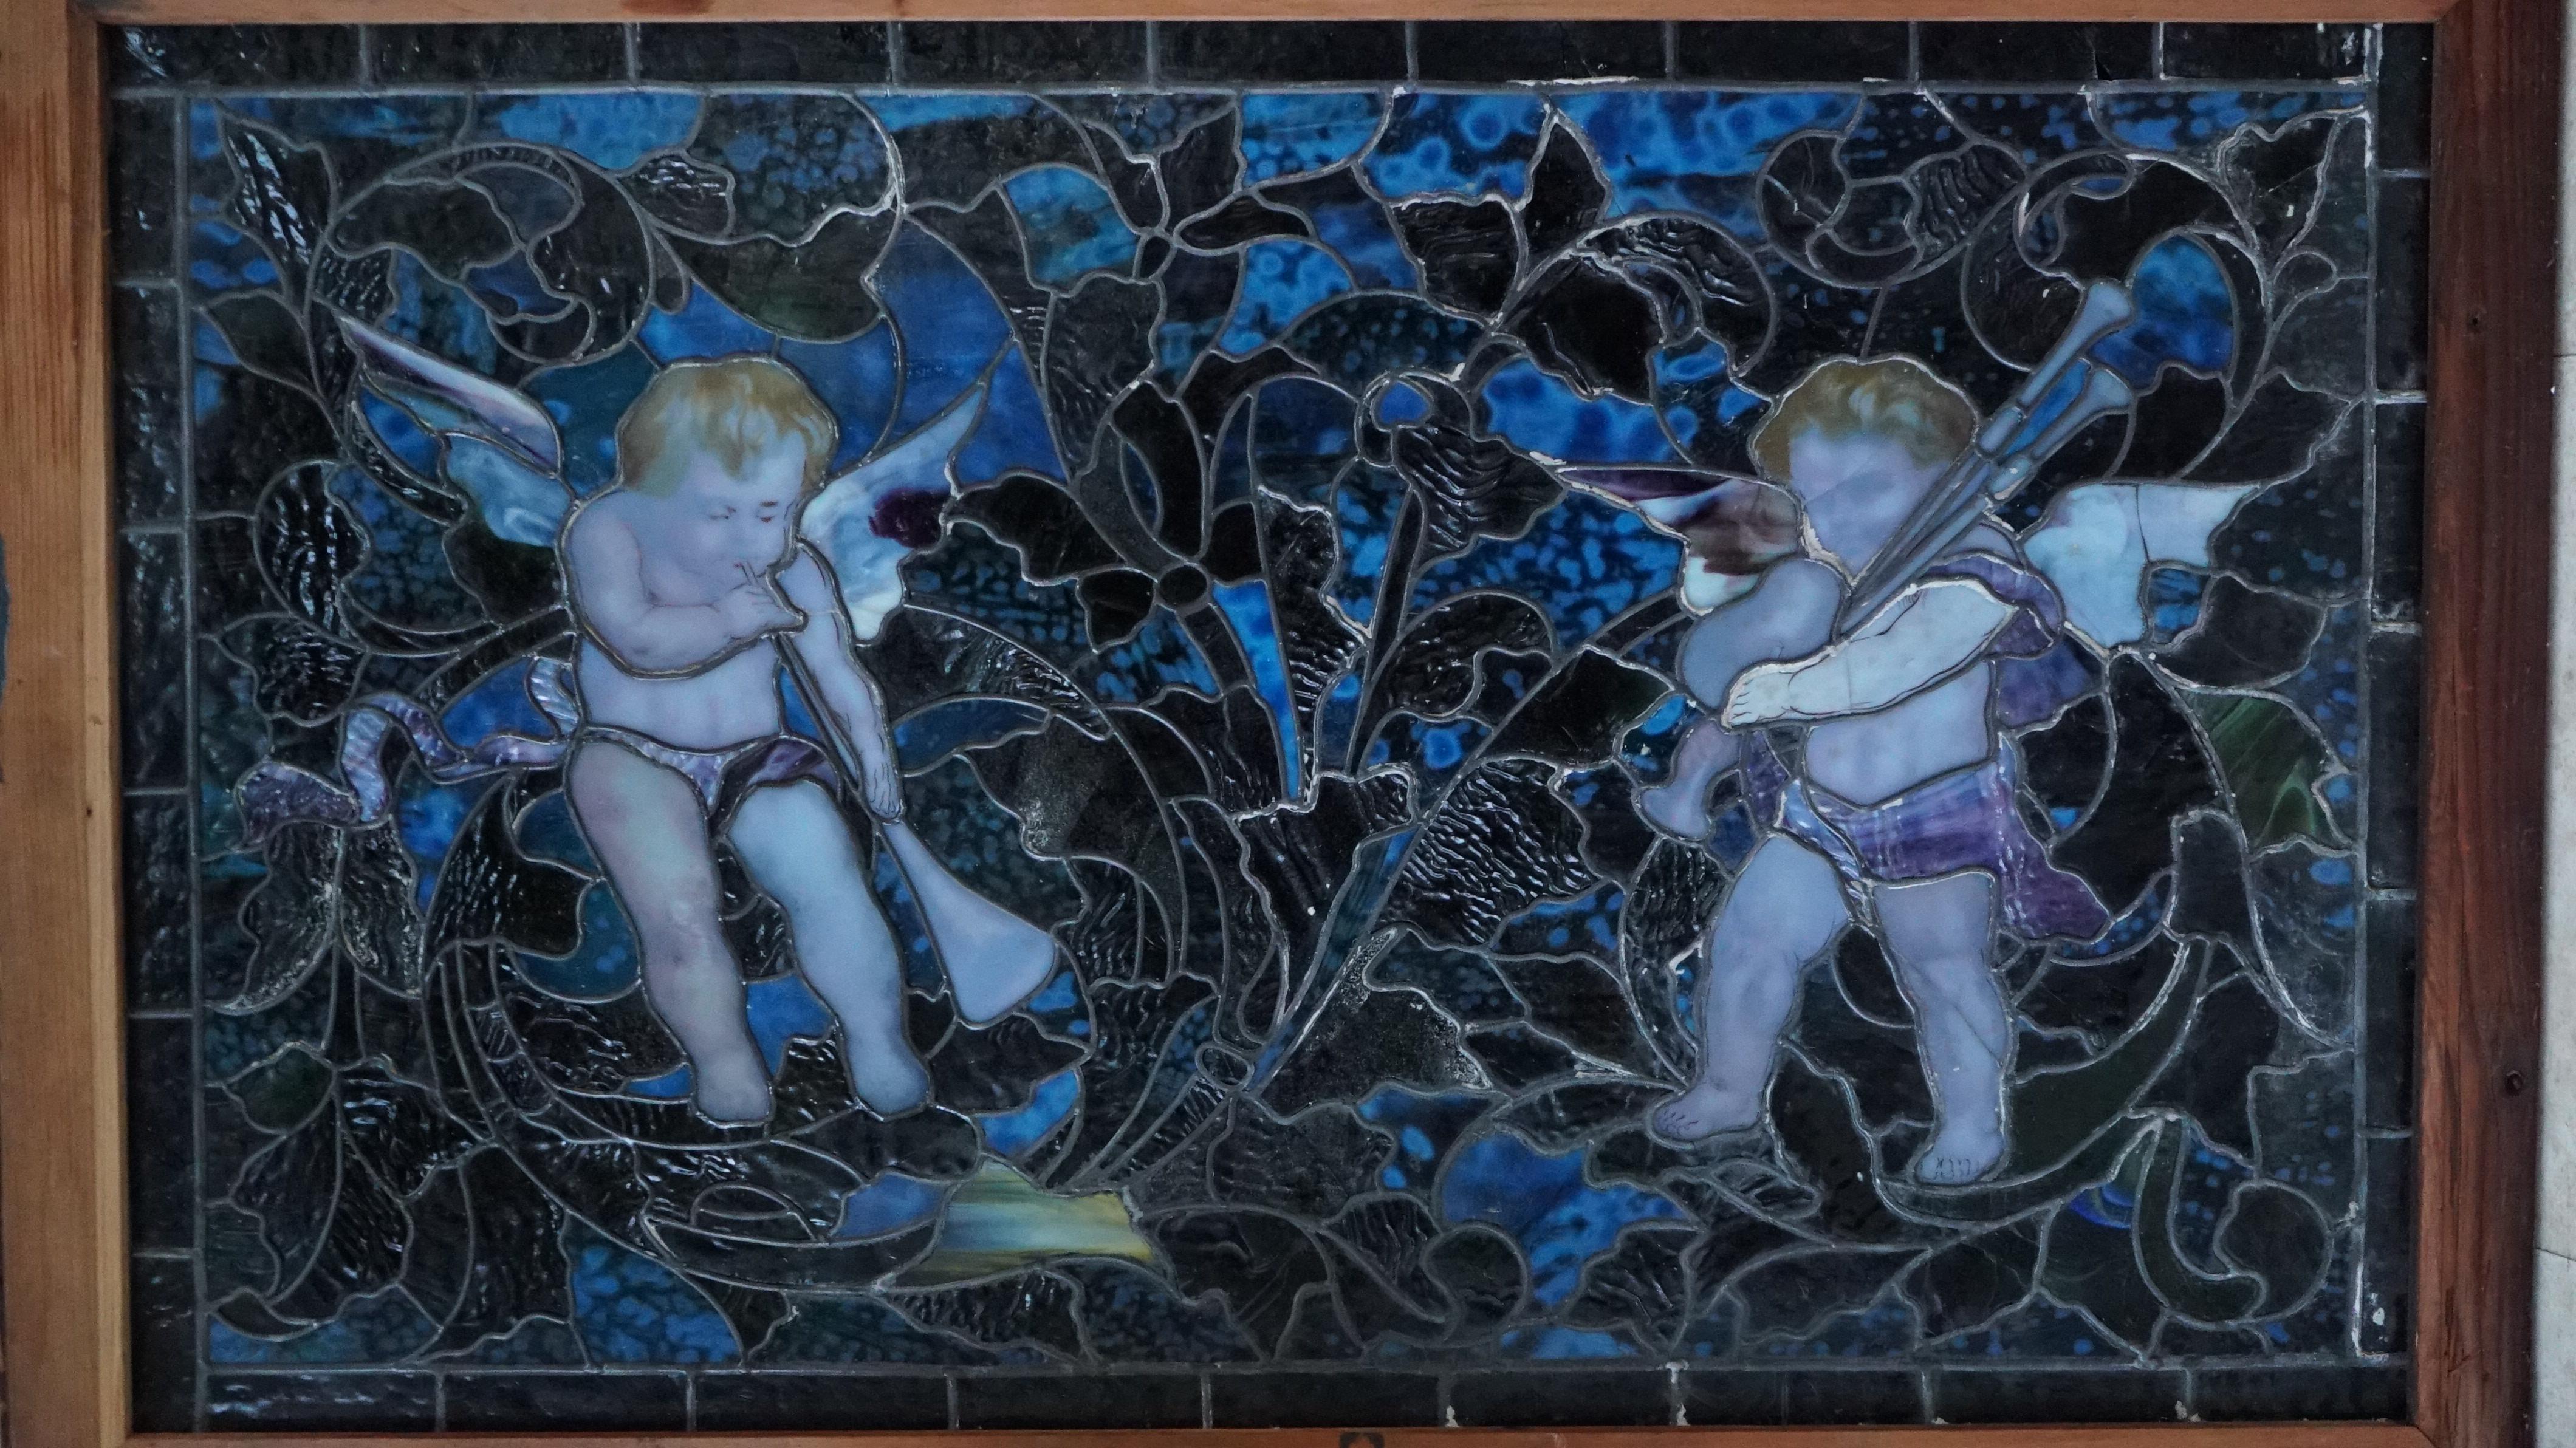 A beautiful example of a leaded art glass music window depicting wing cherubs, playing musical instruments, executed with Tiffany furnace mottel lamp glass set as the background

We acquired this window because we were told it was from the Frederick